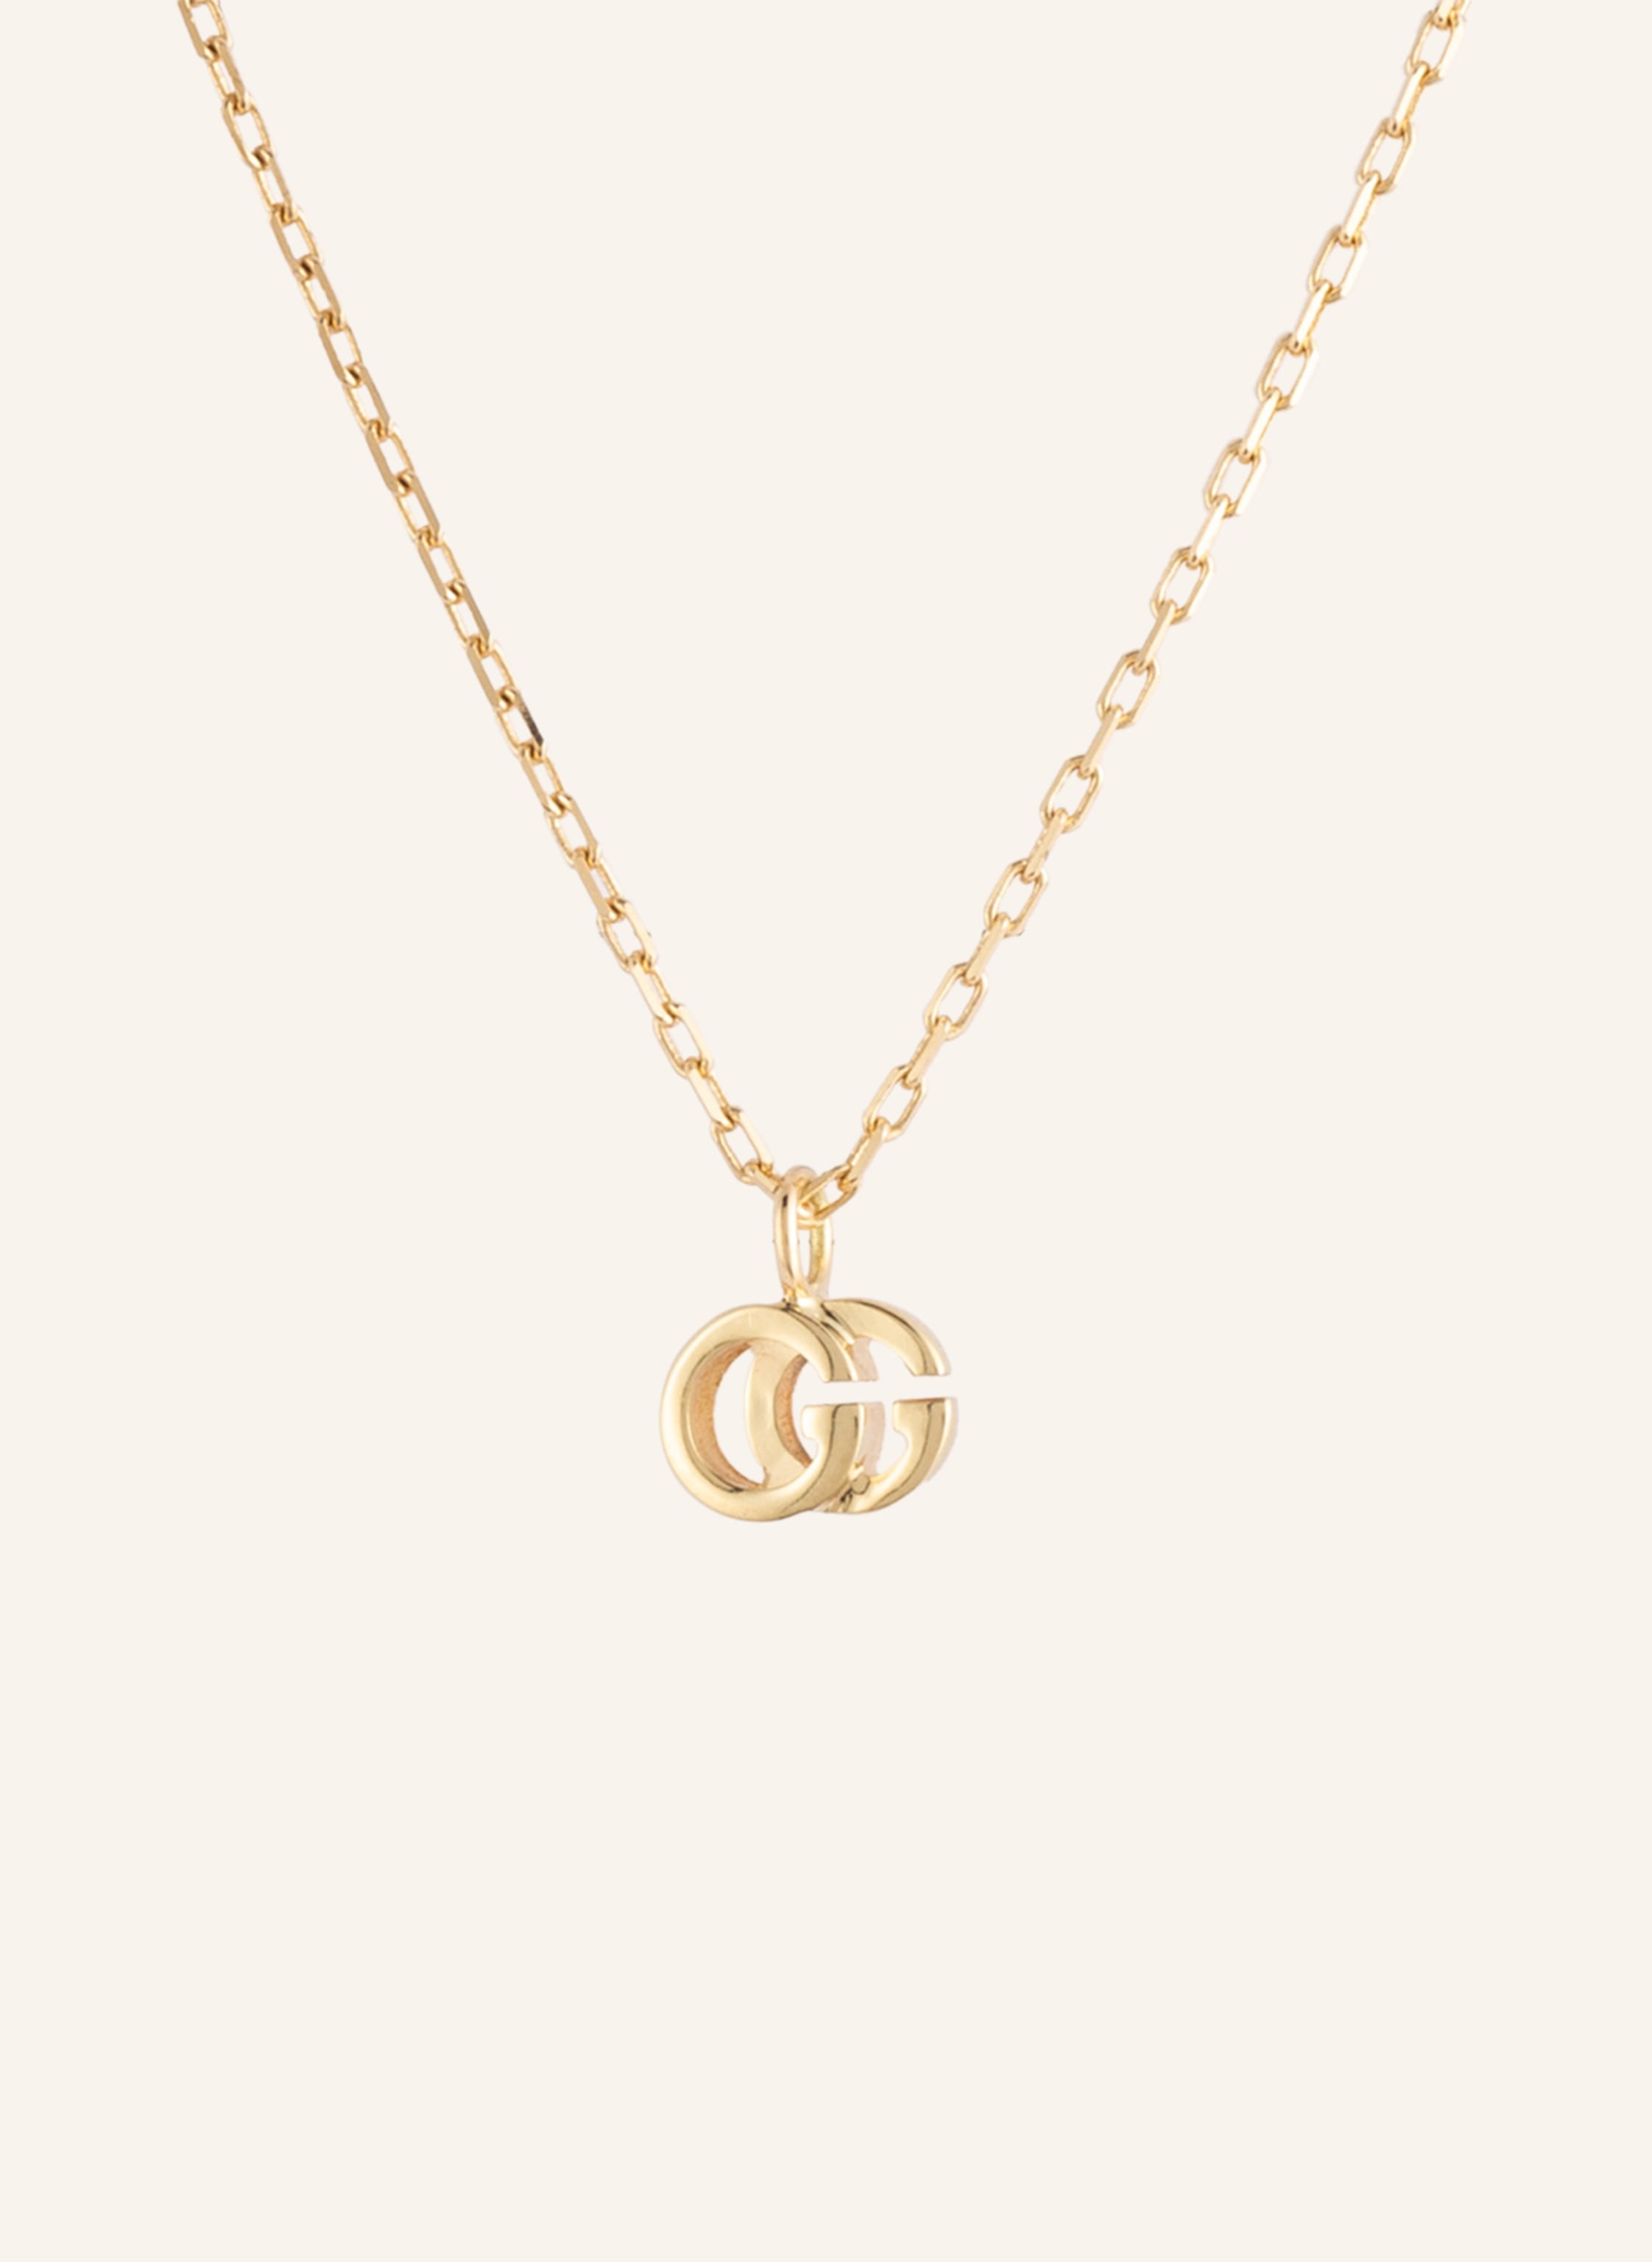 GUCCI Necklace GG RUNNING in gold | Breuninger